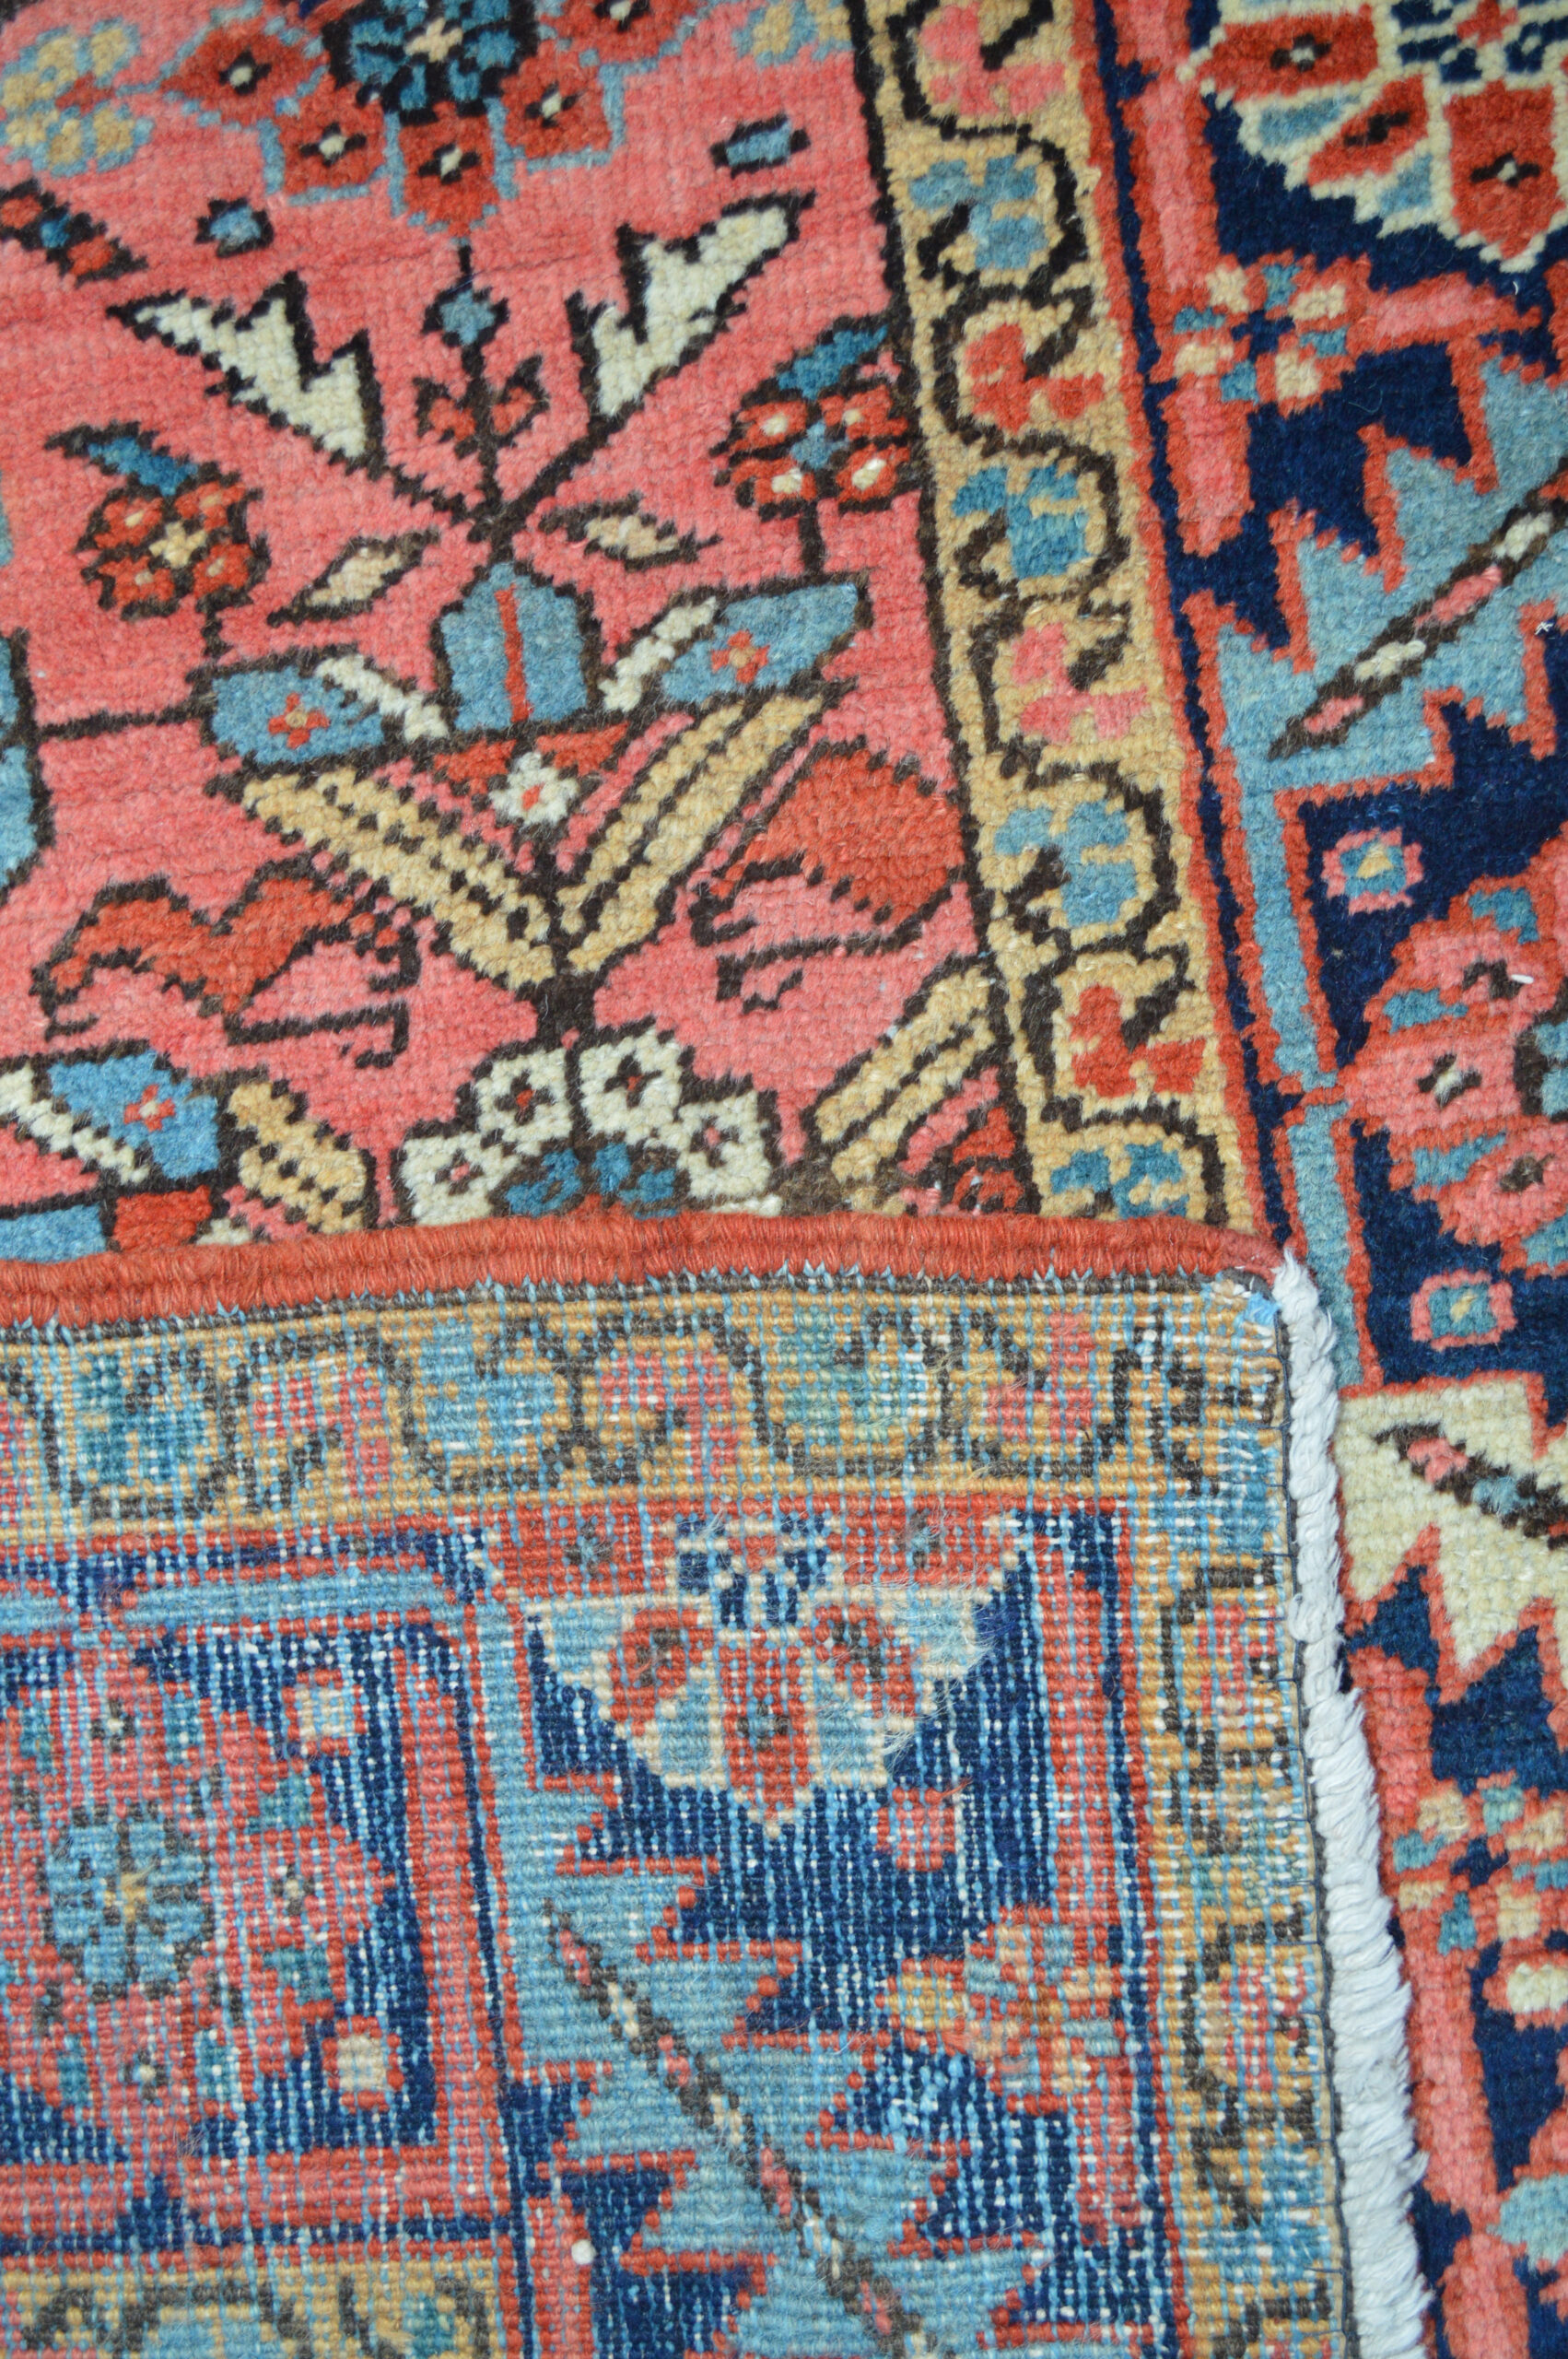 Weave detail from an antique Persian Heriz rug - Douglas Stock Gallery, antique Oriental rugs, South Natick, Wellesley, Weston, Newton, Brookline,MA area